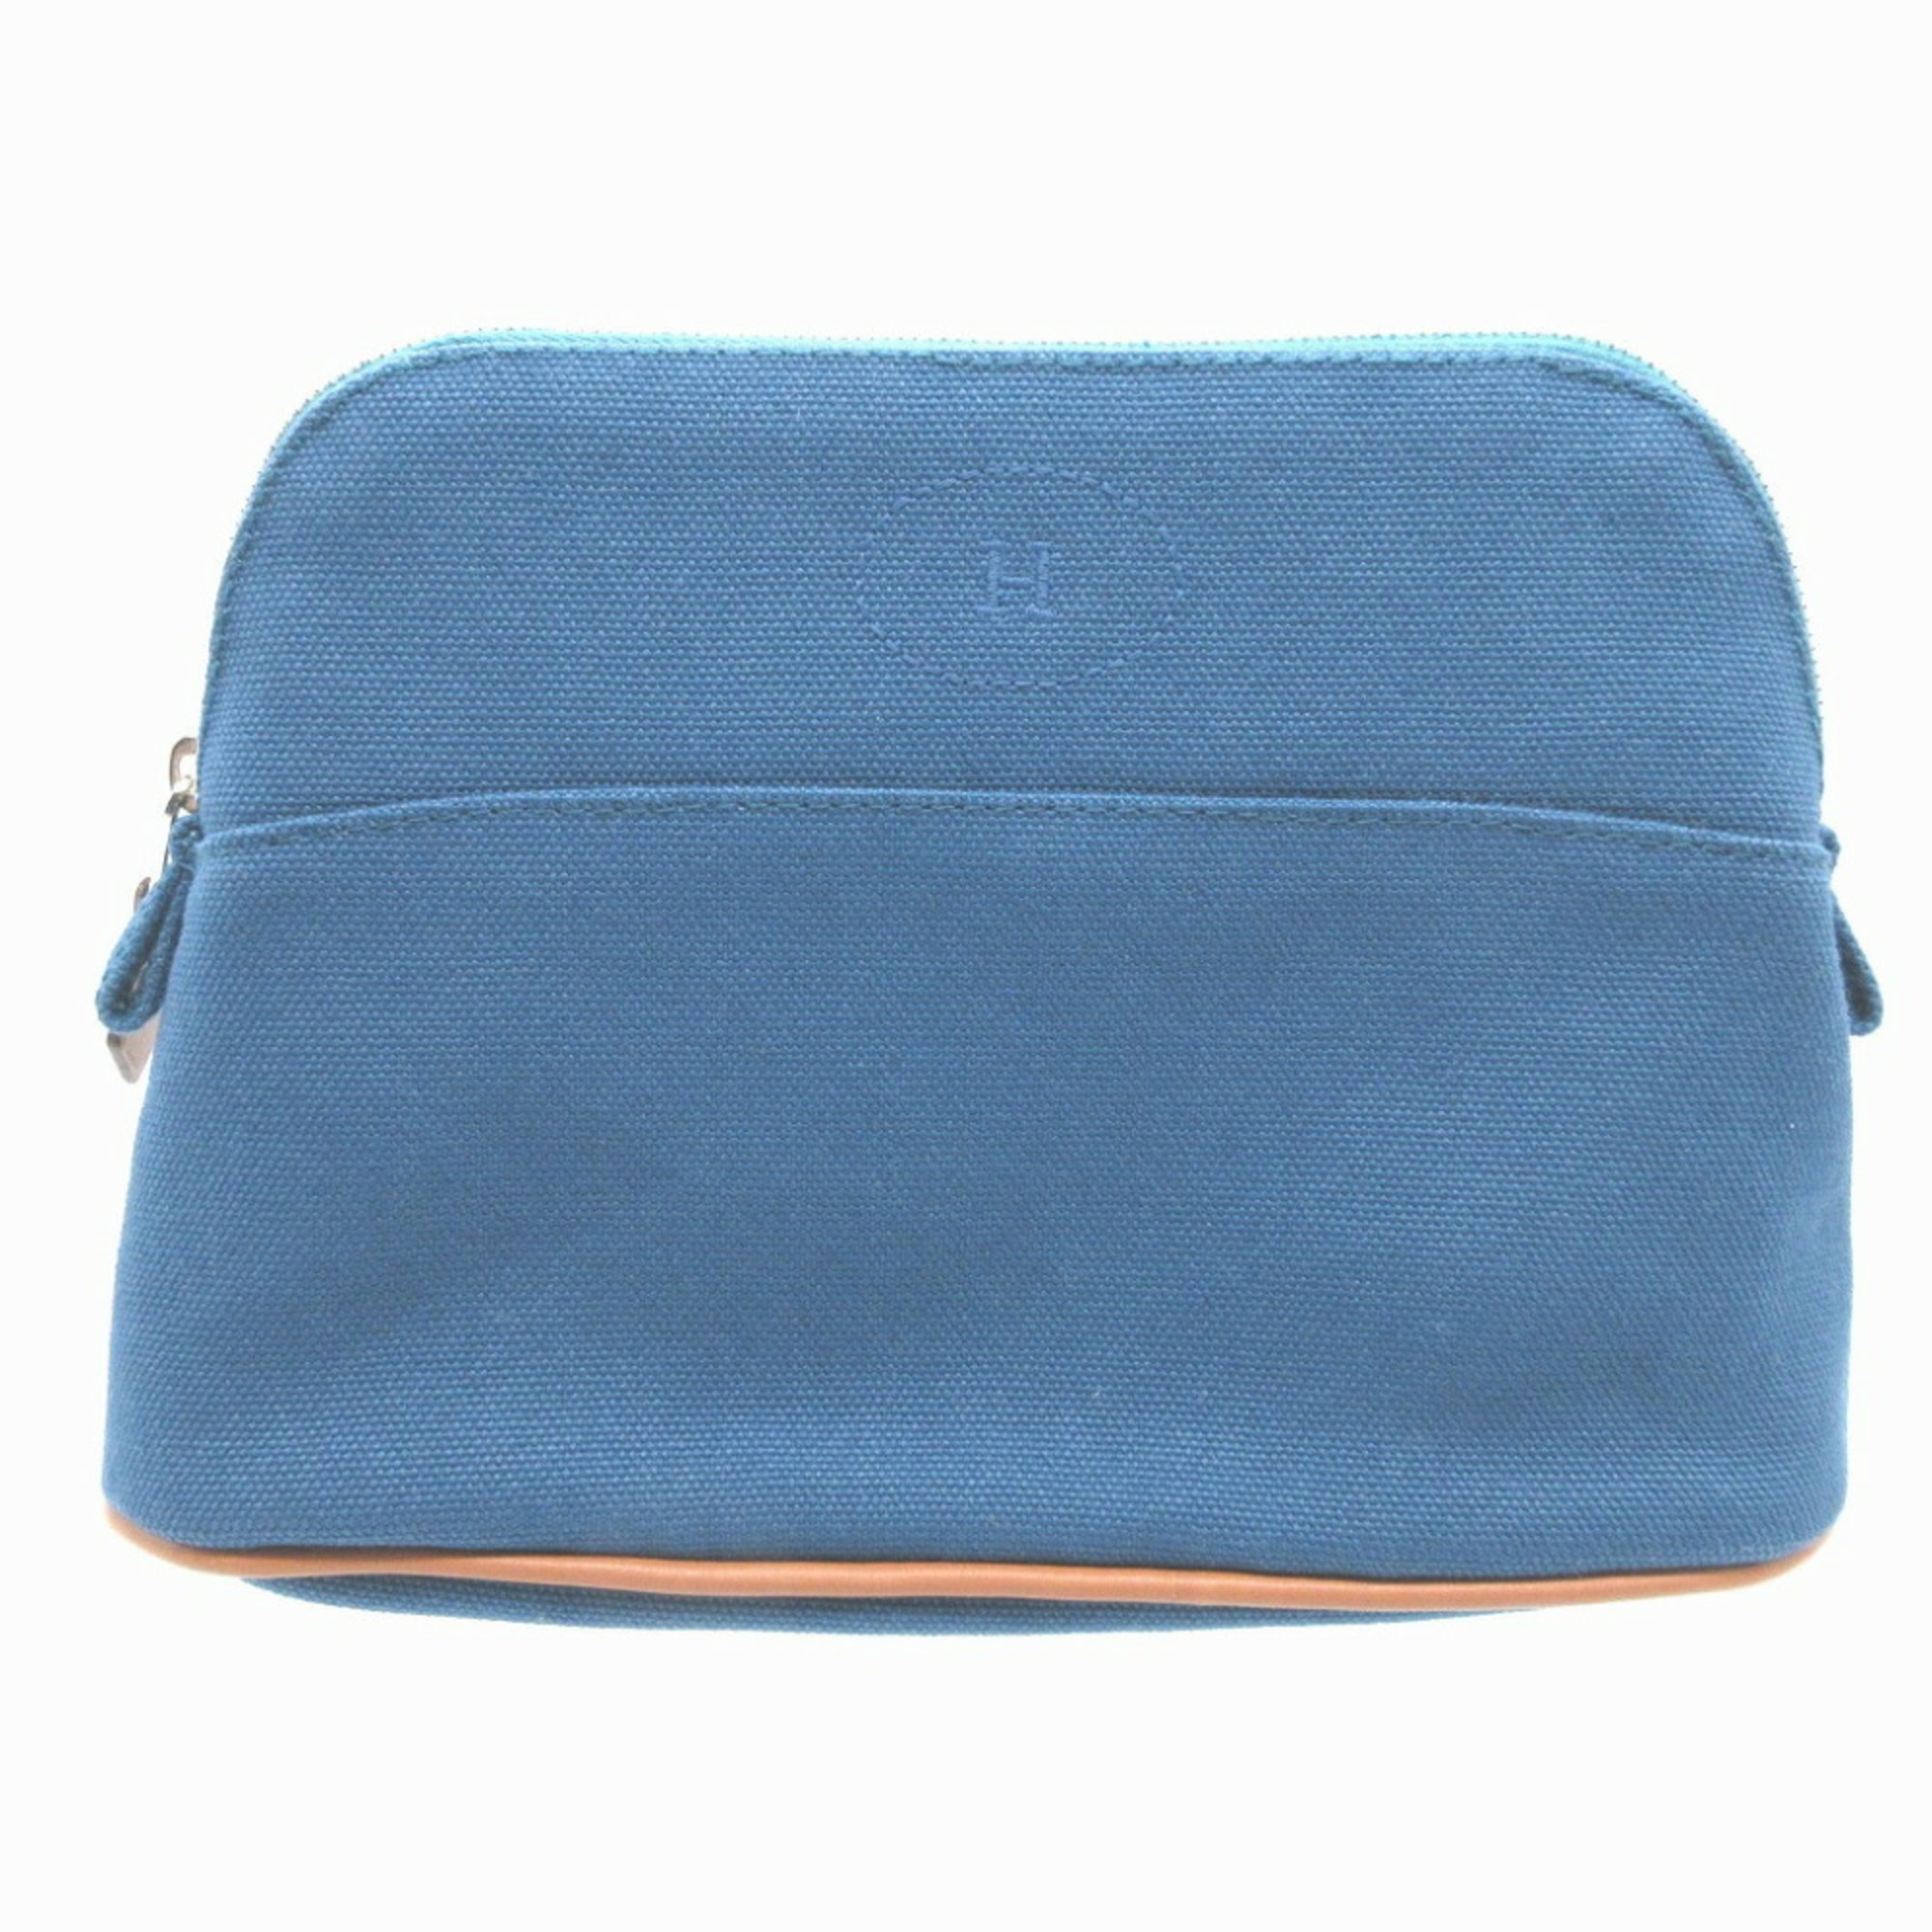 Hermes Canvas Blue Bolide Pouch 0276HERMES